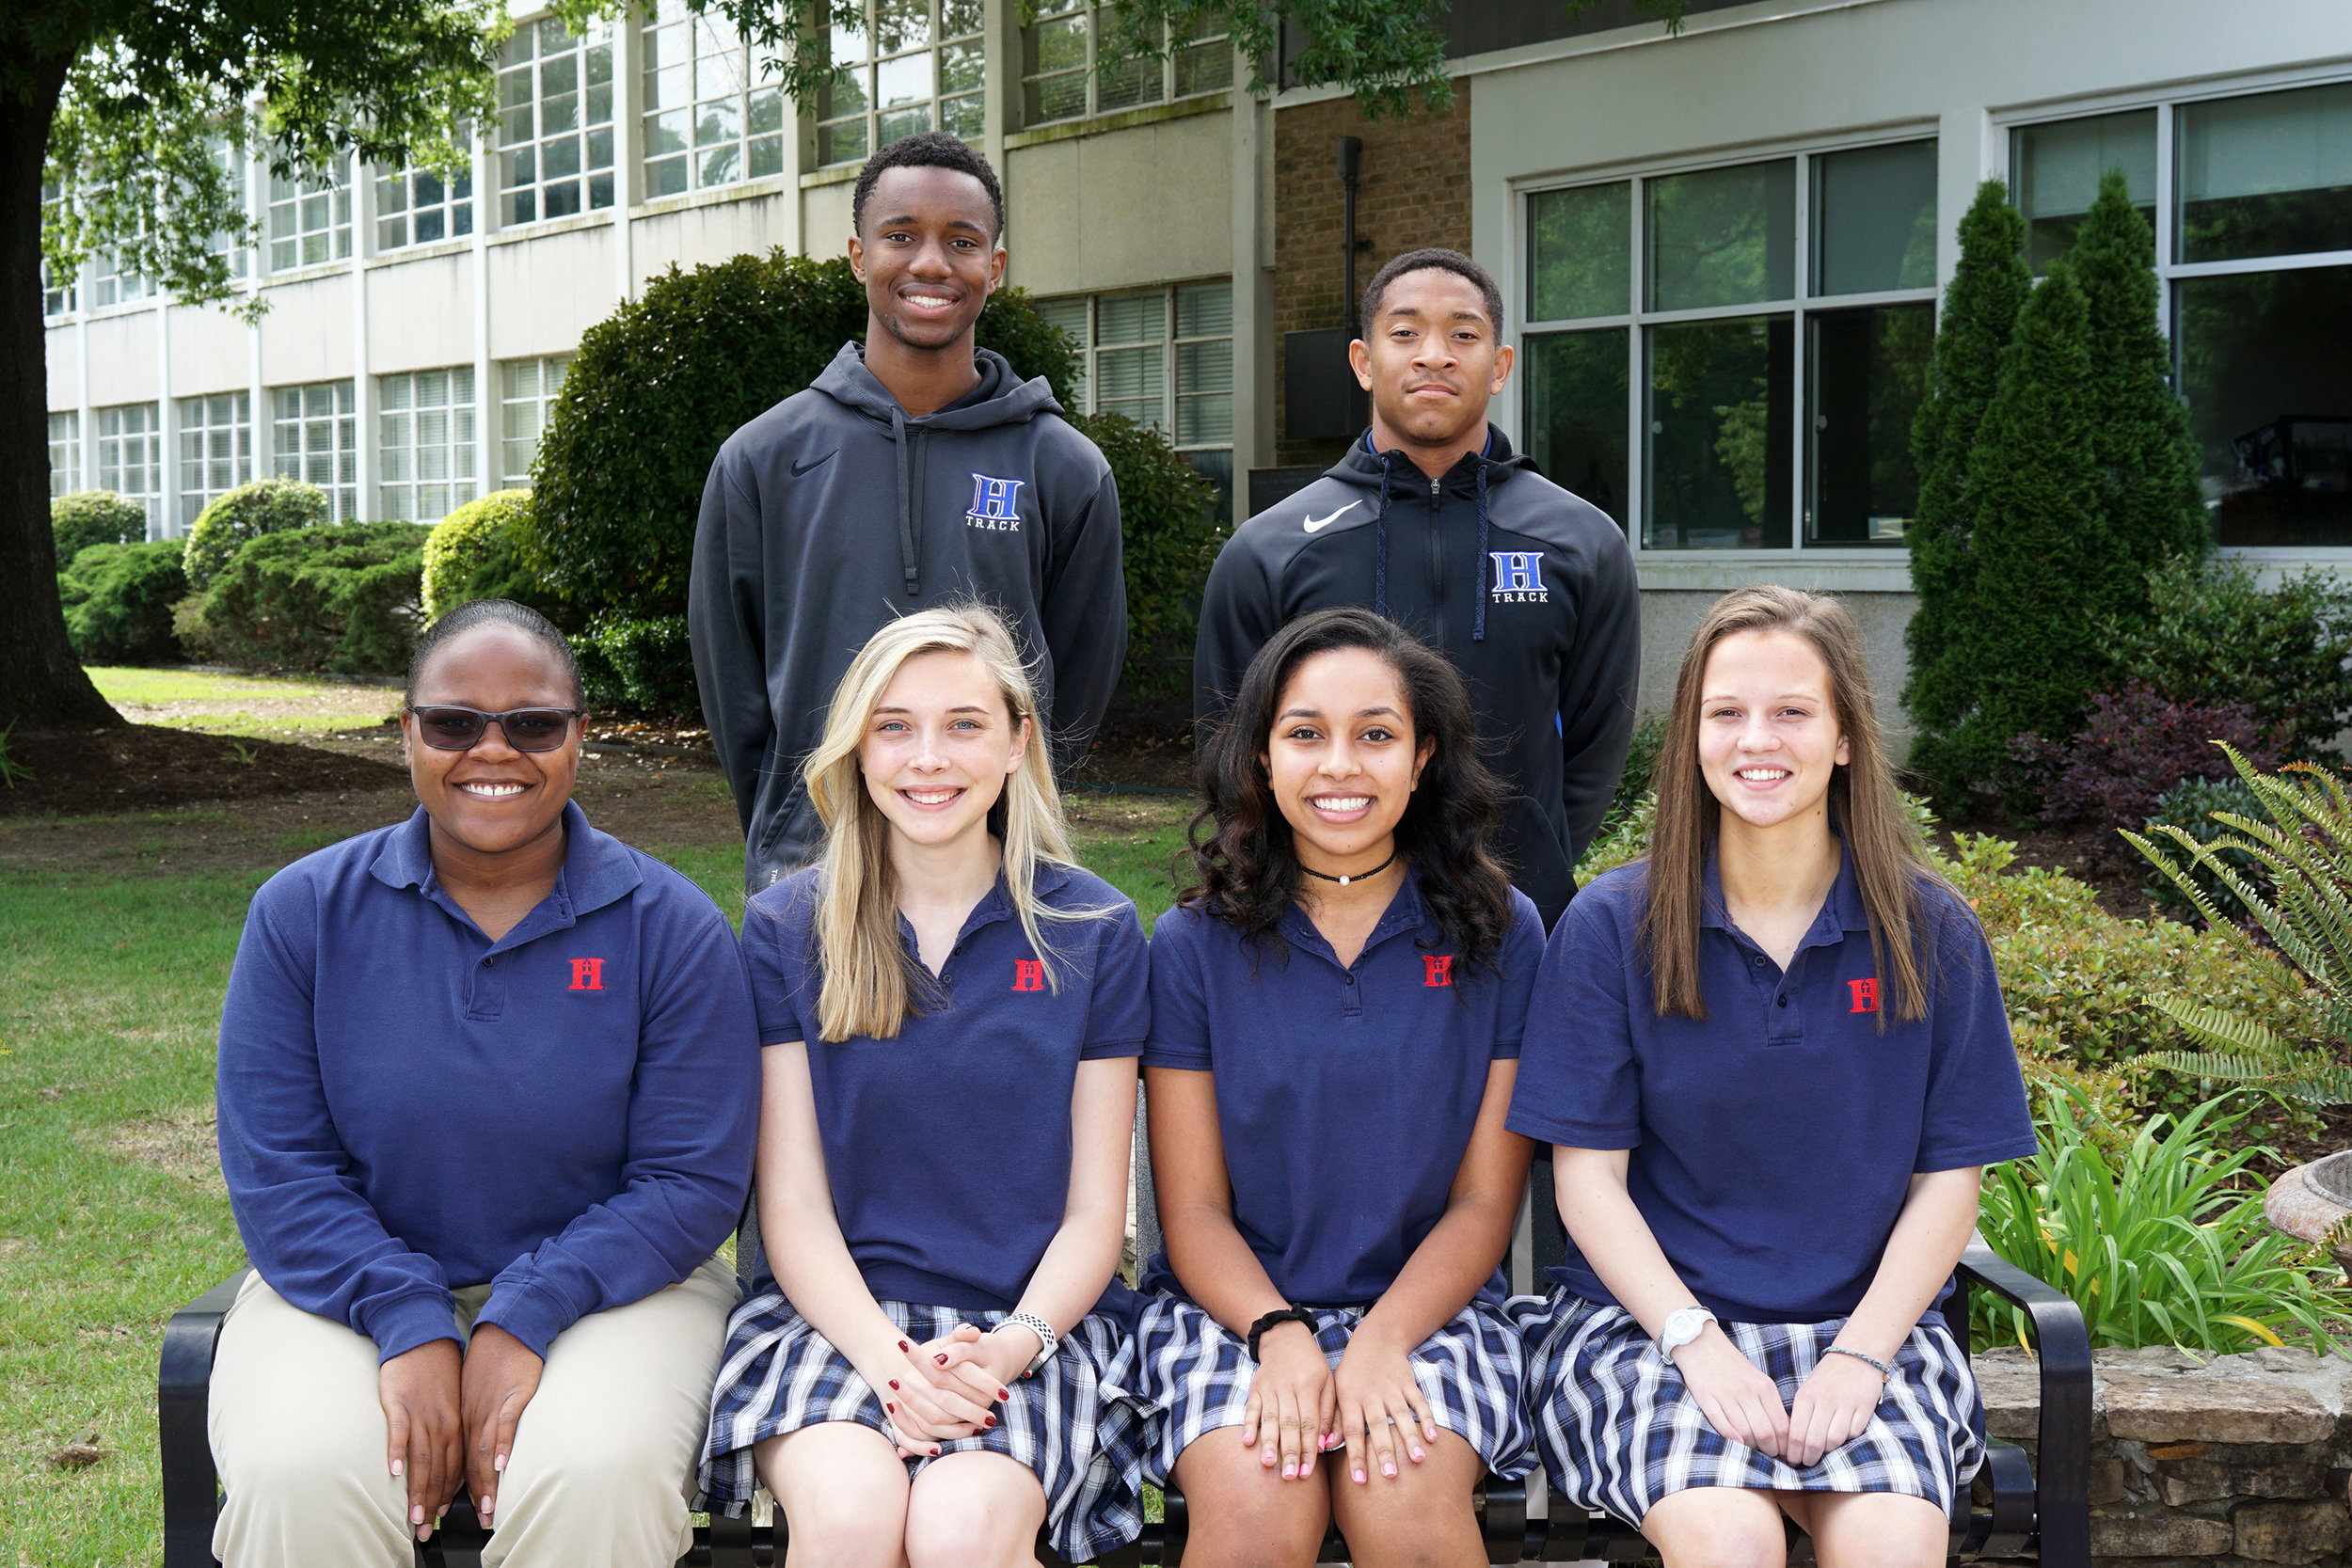 Back row (l to r): Myles Neely, Jordan Clay Front row (l to r): Jocelyn Bringht, Brooke Kenworthy, Liliana Mohamed, Mary Paige Rowsey